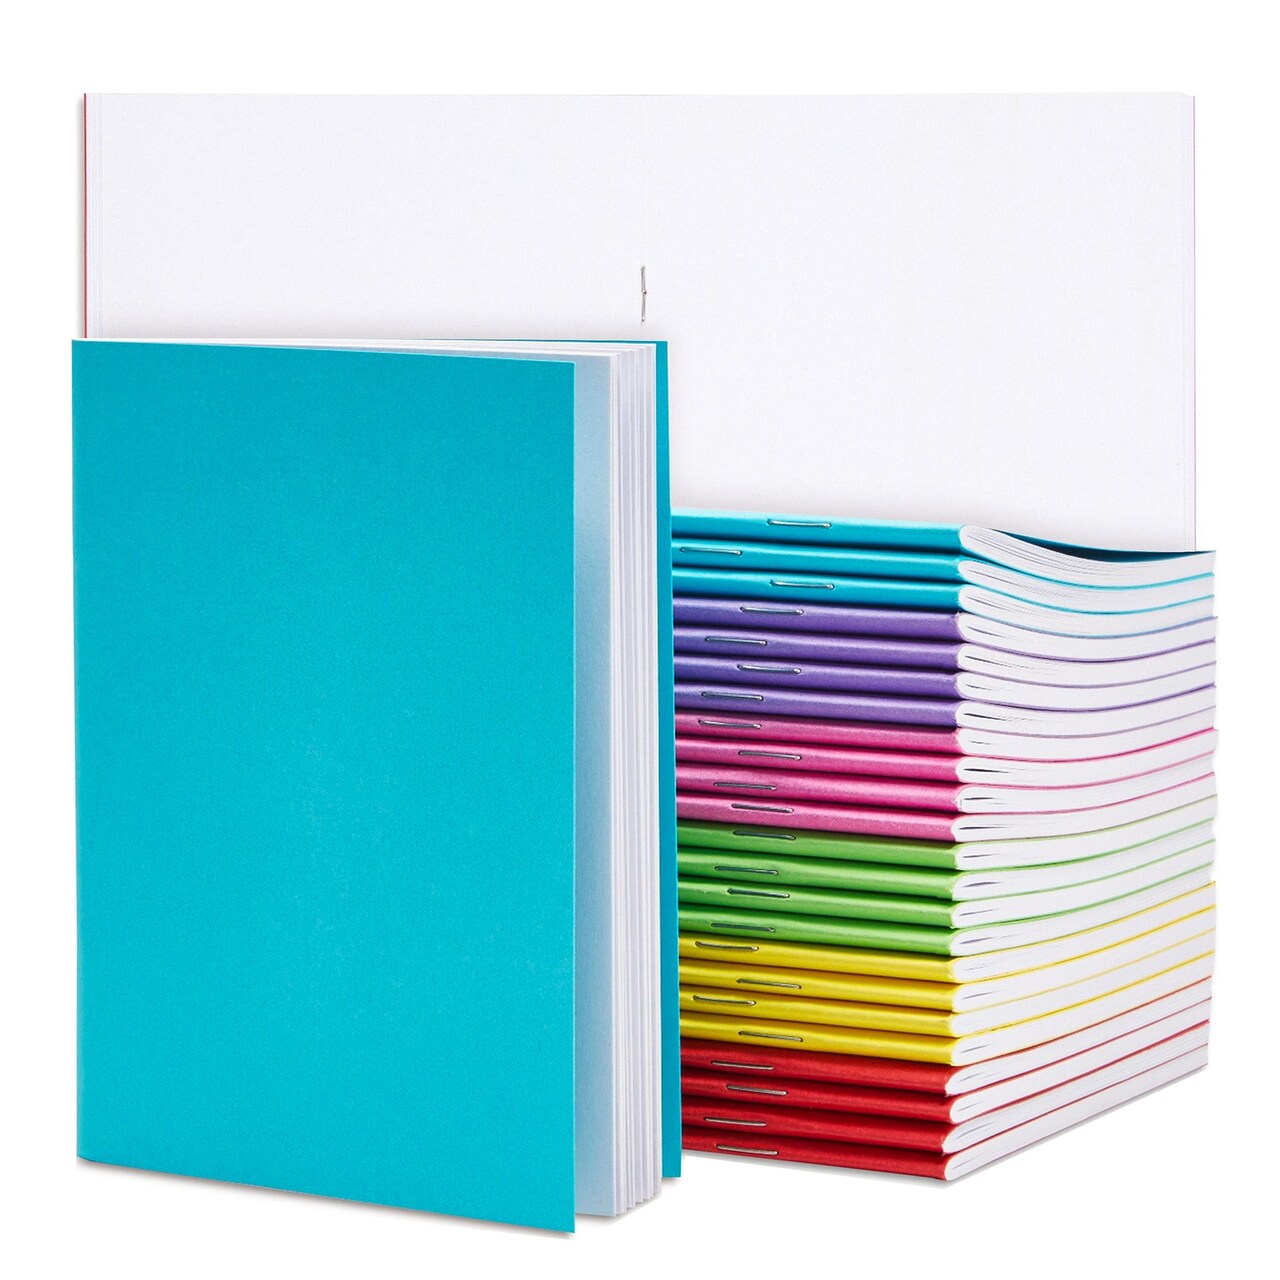 24 Pack Blank Books for Kids to Write Stories, Bulk Small Notebooks  Journals for Students, Drawing, Sketching, Unlined Pocket Size (Colorful  Covers